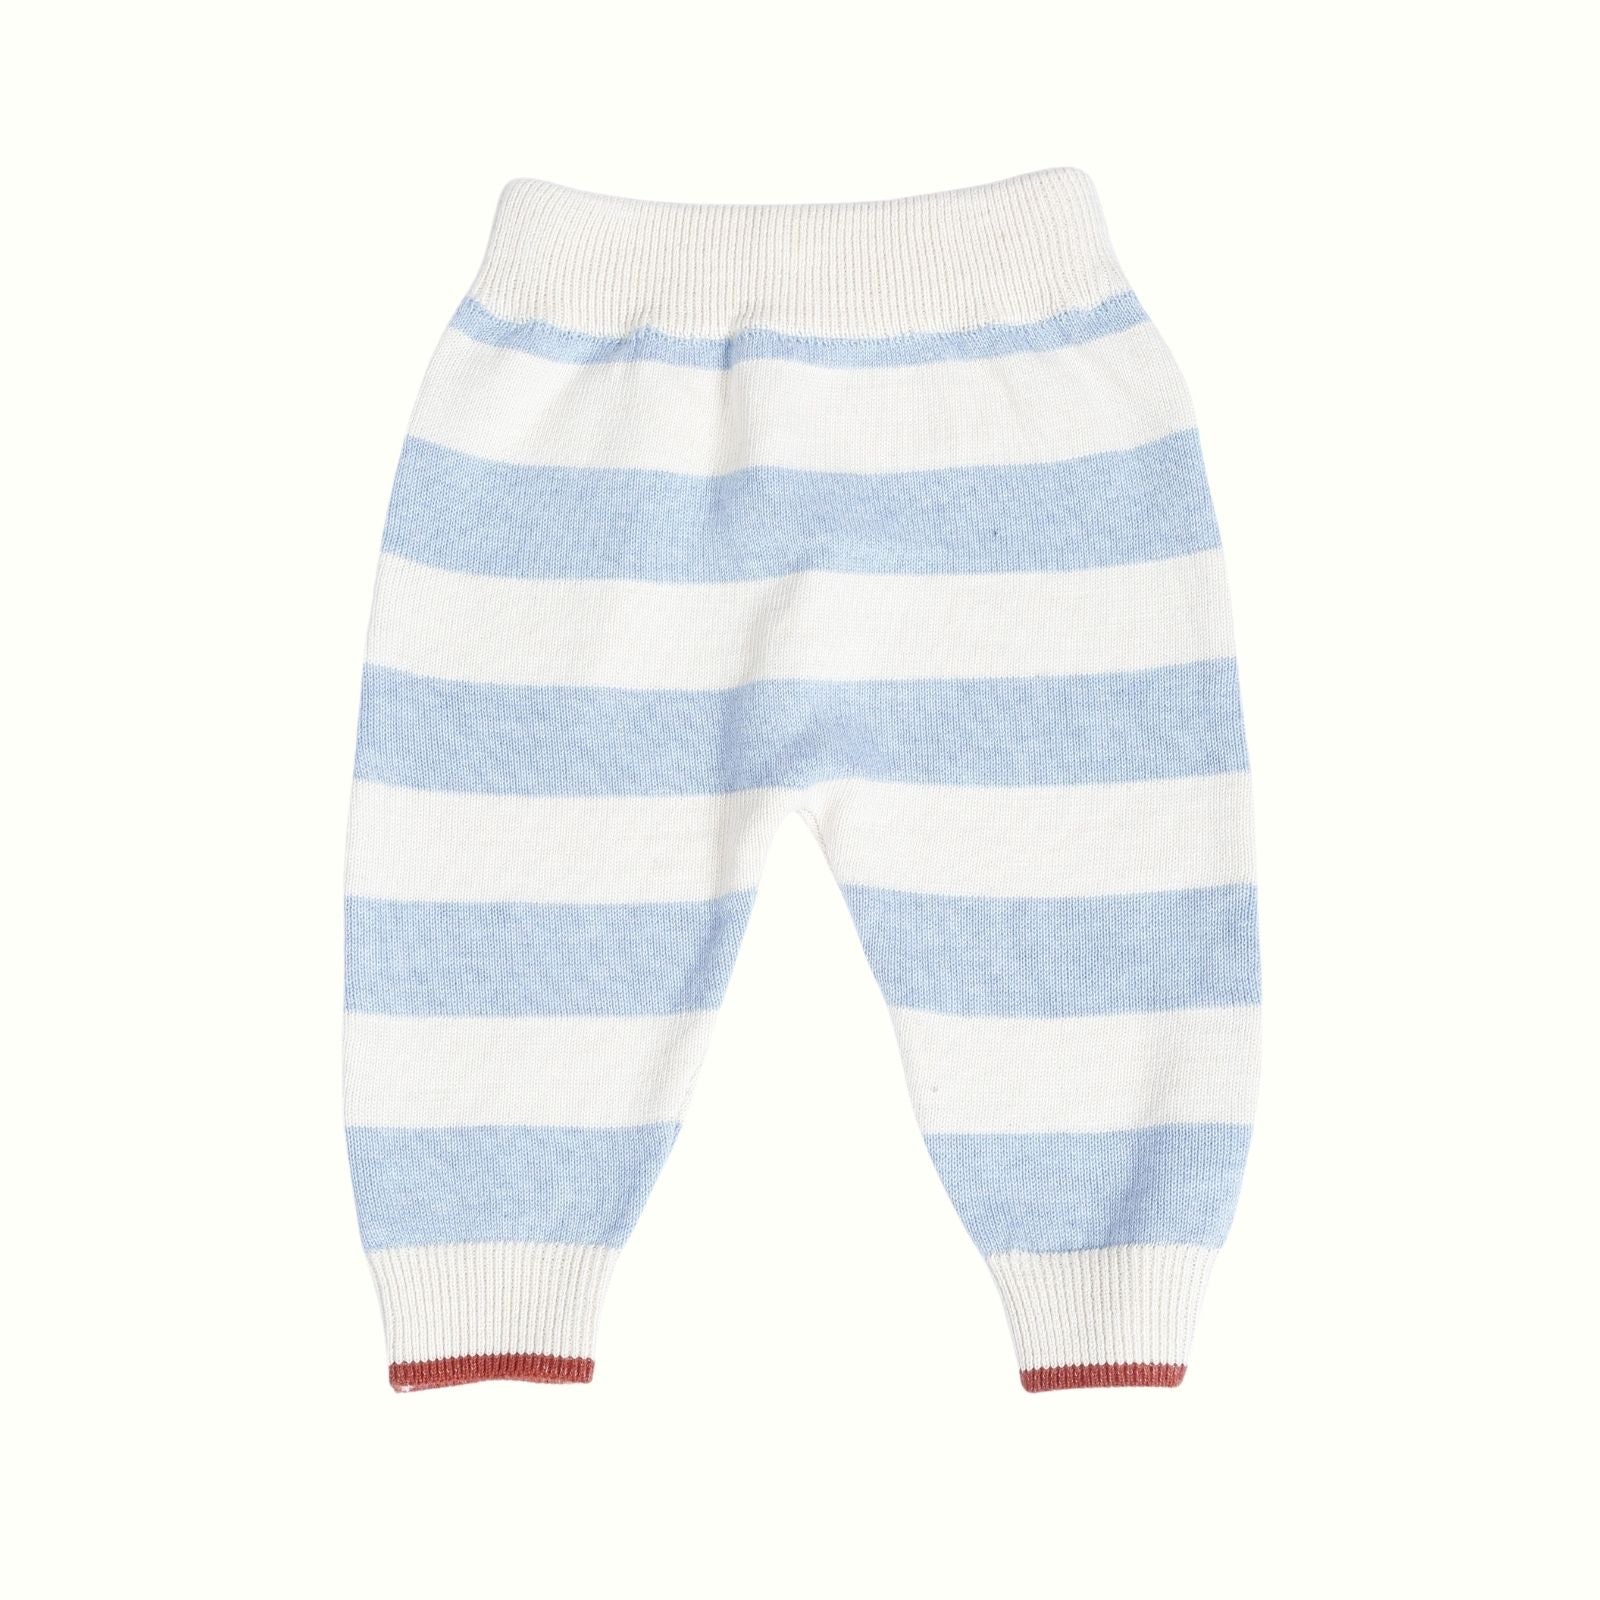 Greendeer Soulful Tiger Patch 100% Cotton Sweater with Lower - Baby Blue - Set of 2